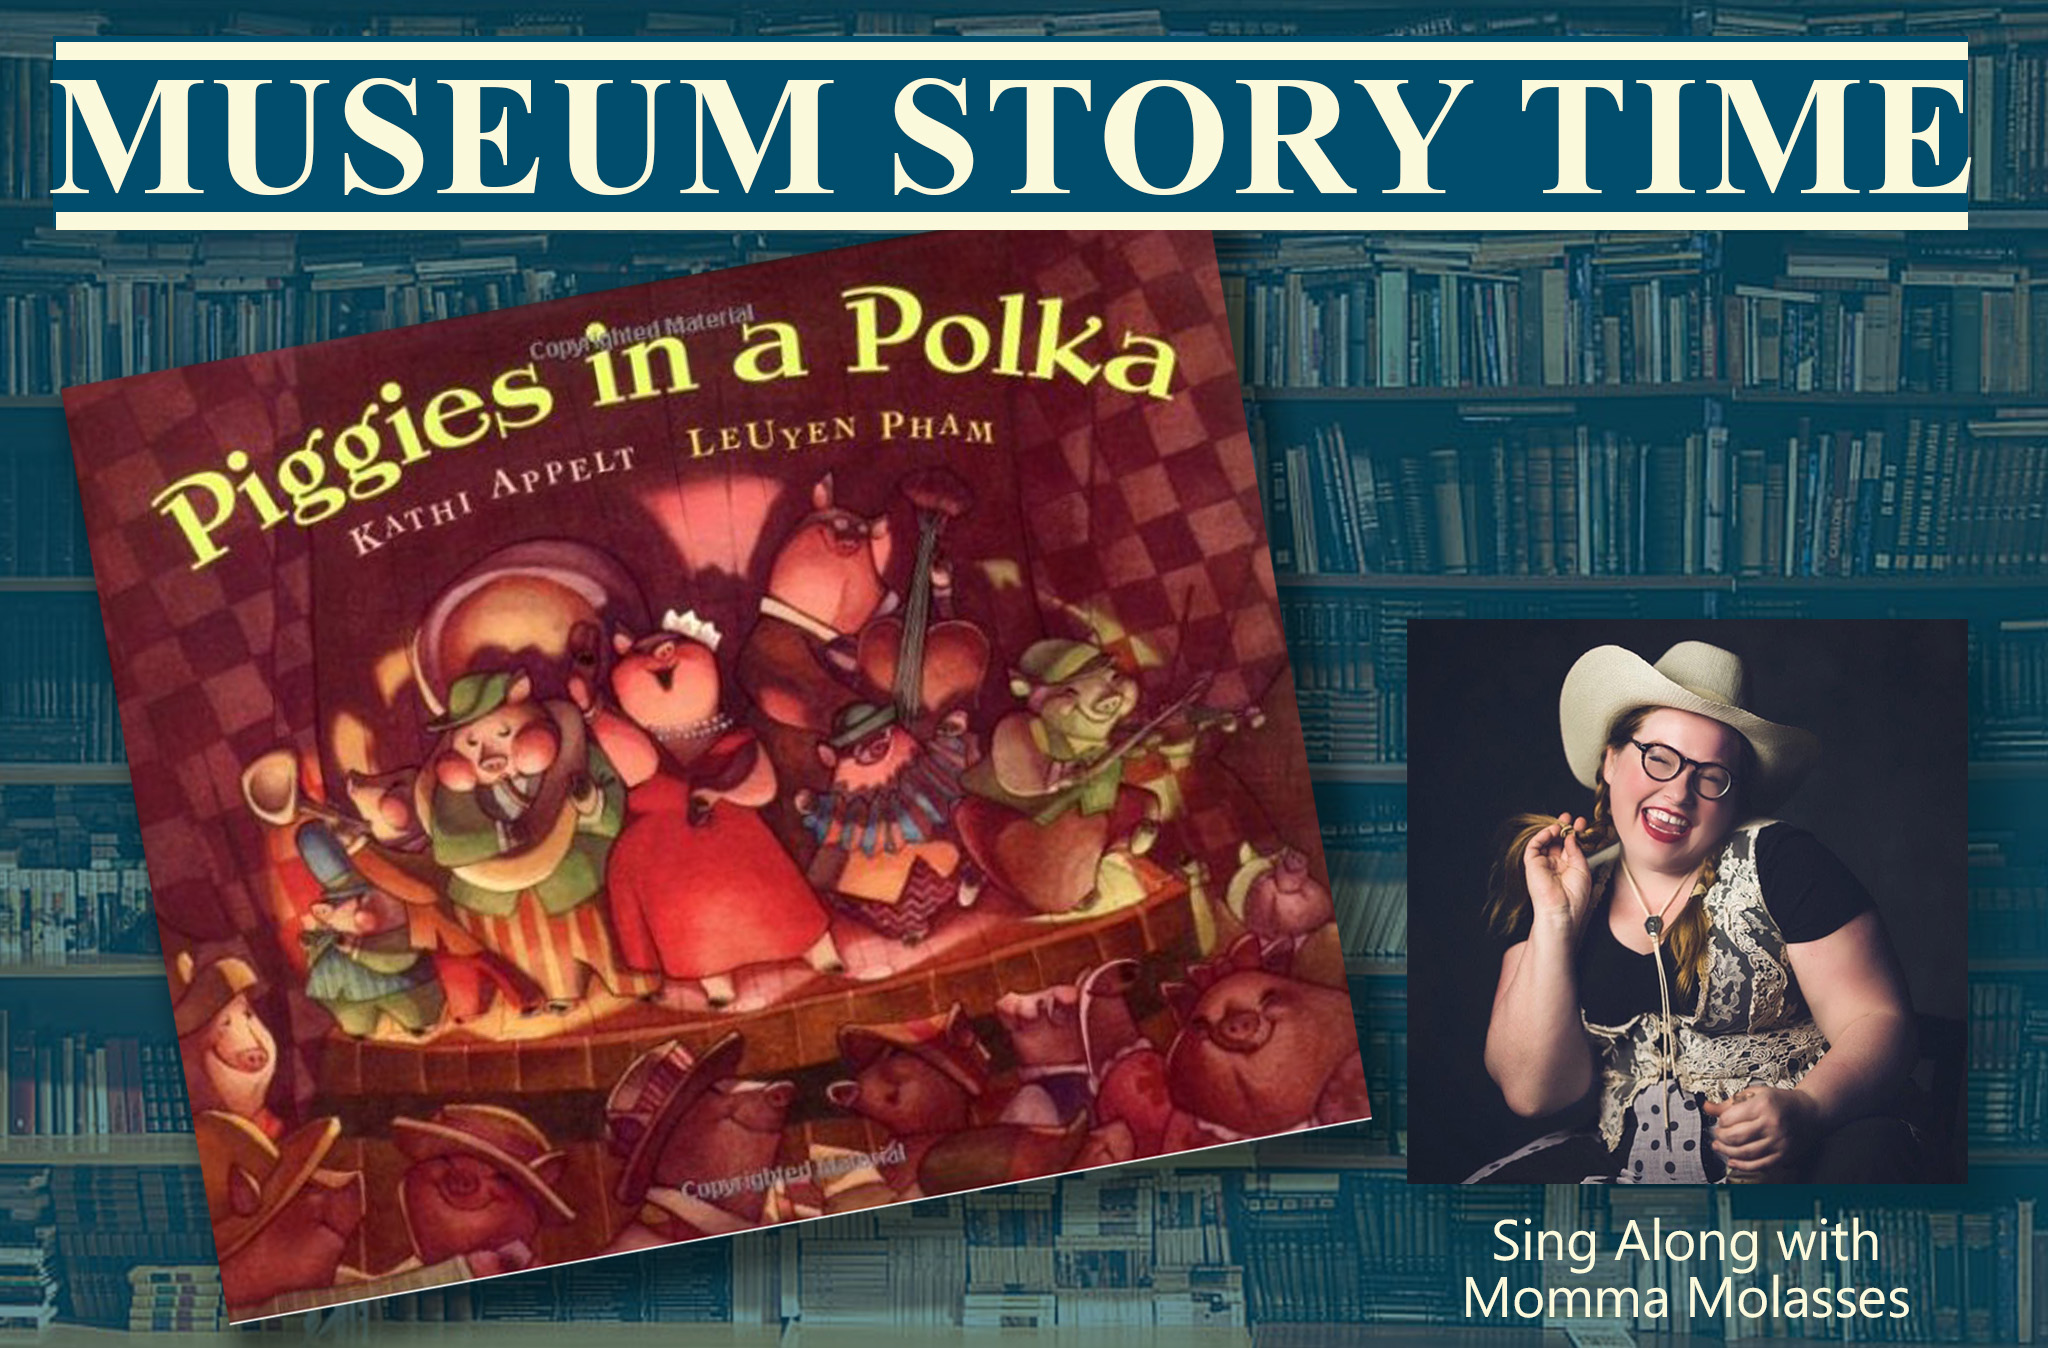 Museum Story Time: Piggies in a Polka by Kathi Appelt